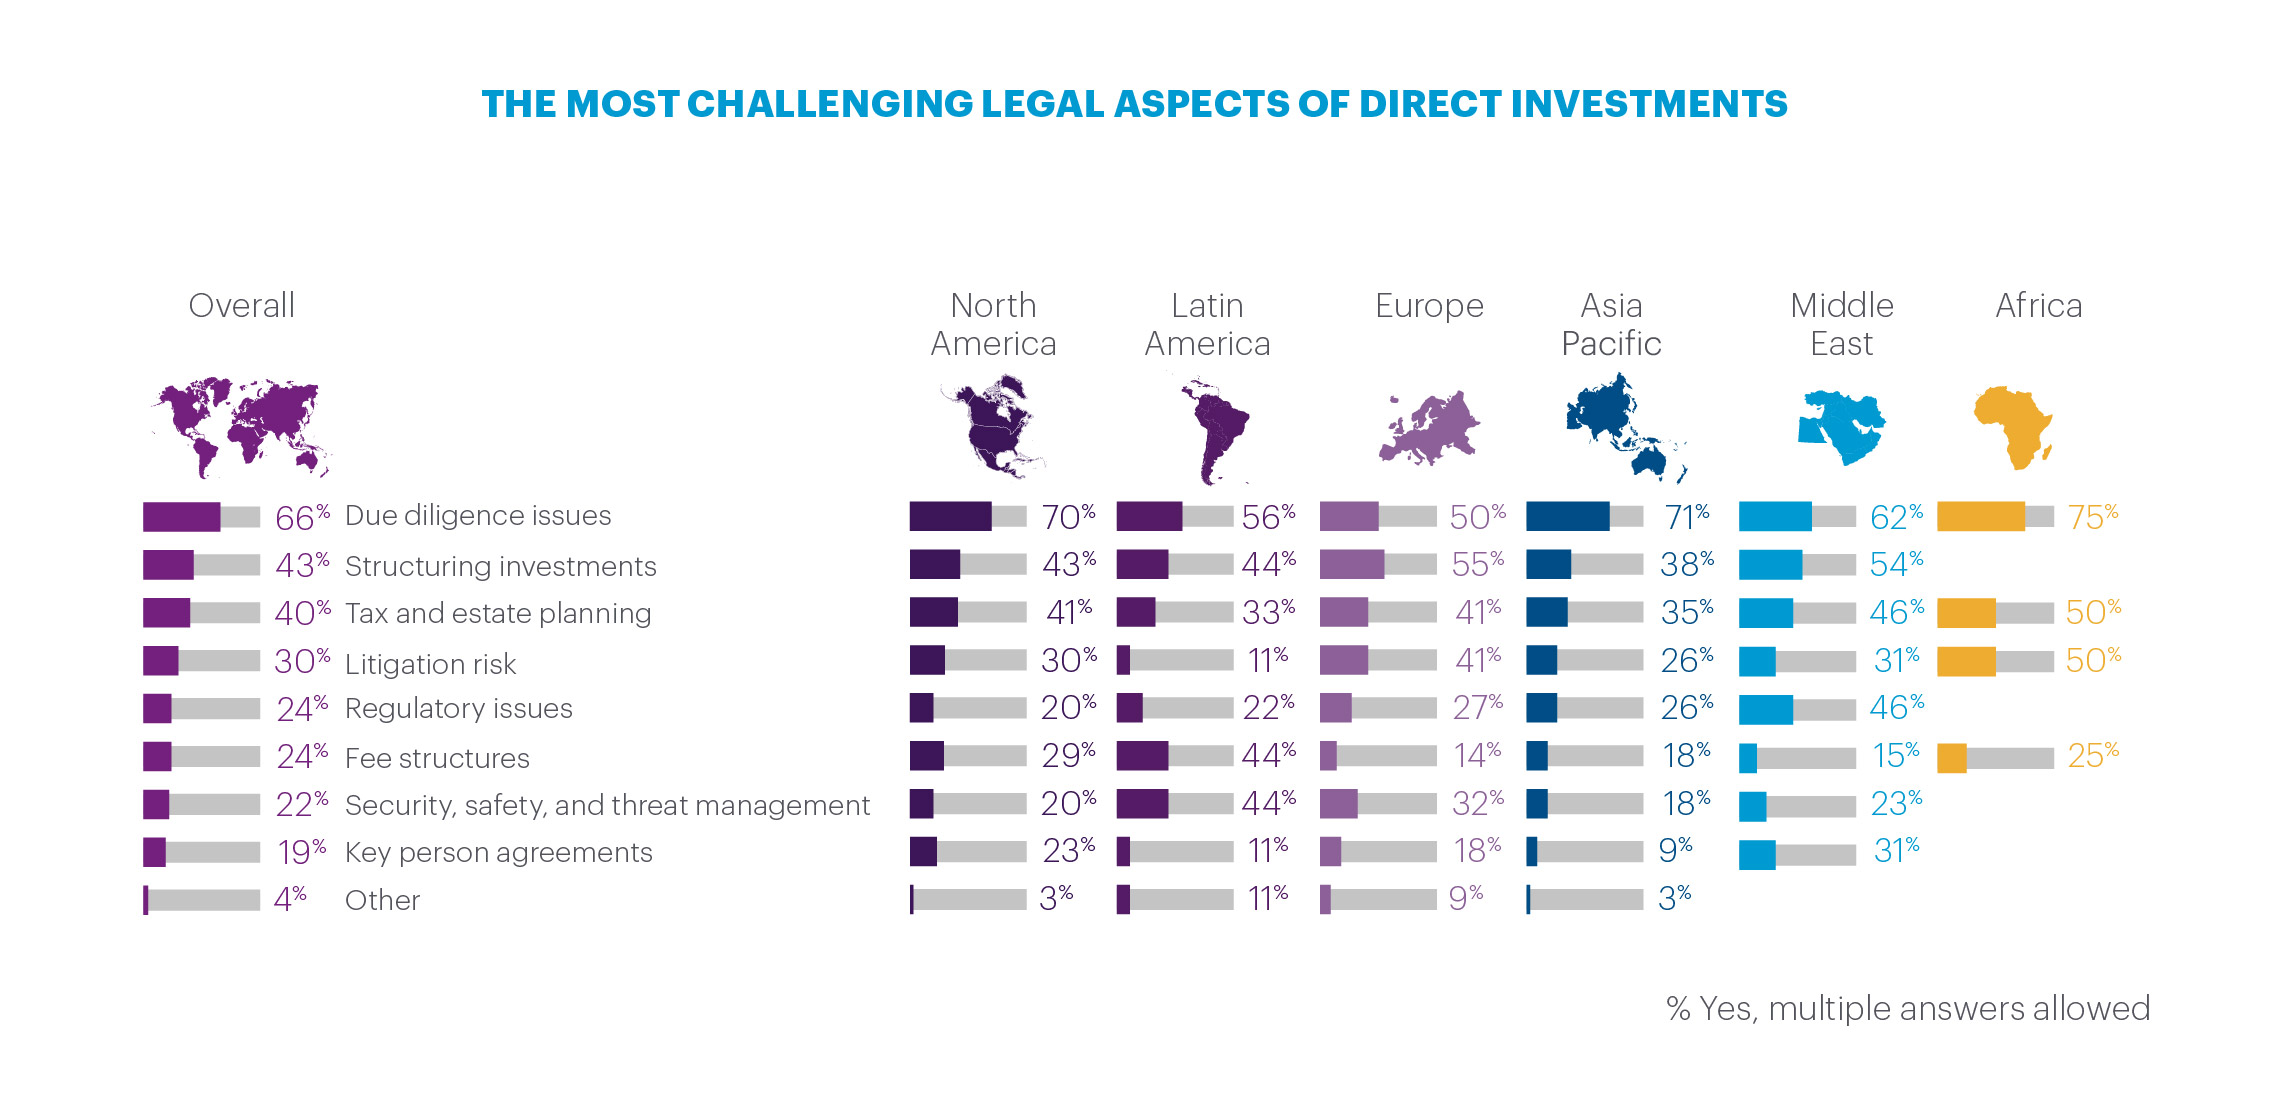 Regional percentages of most challenging legal aspects of direct investments